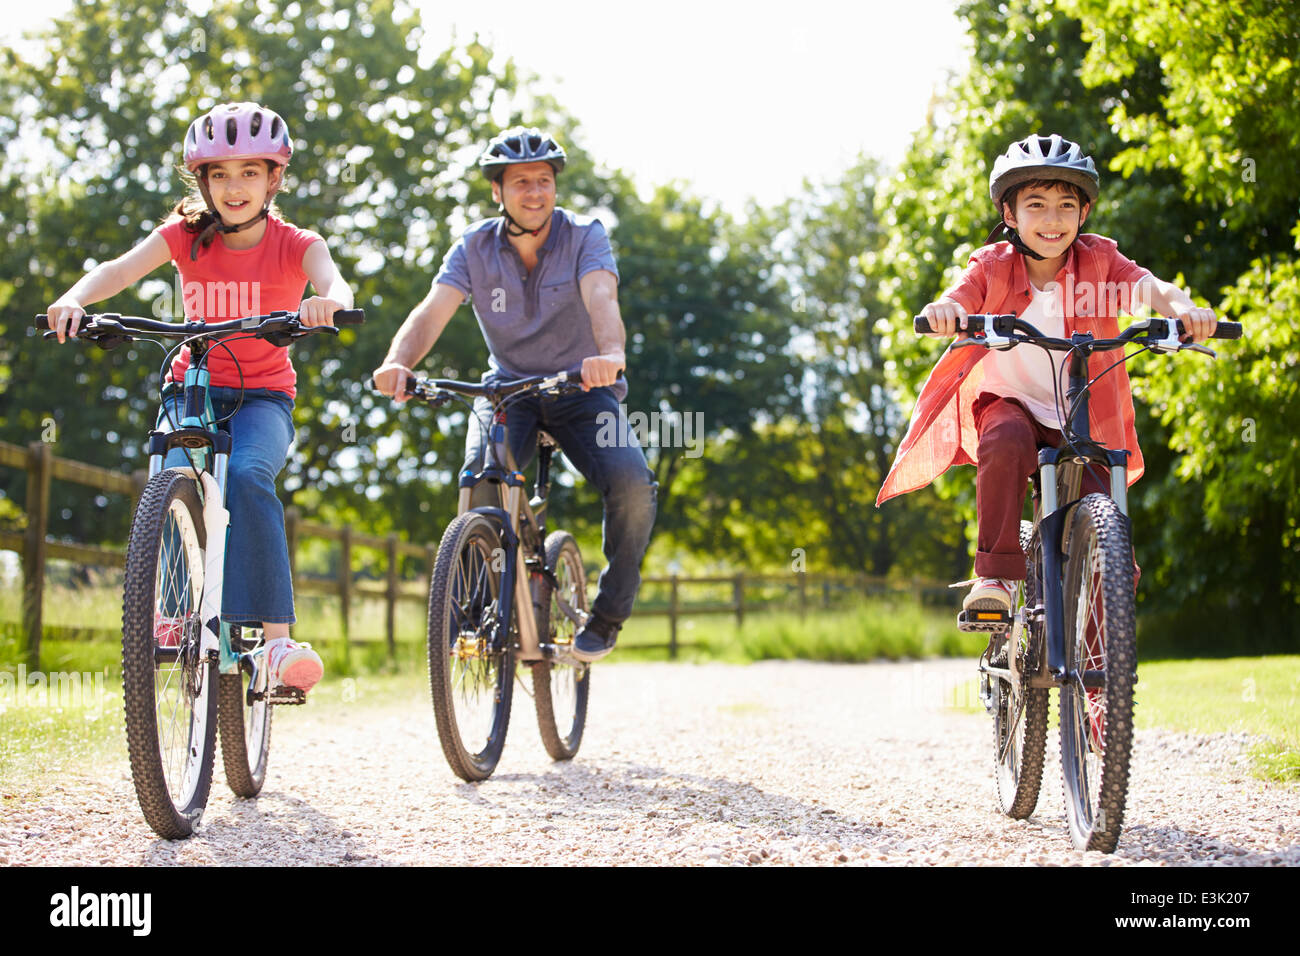 Hispanic Father And Children On Cycle Ride In Countryside Stock Photo